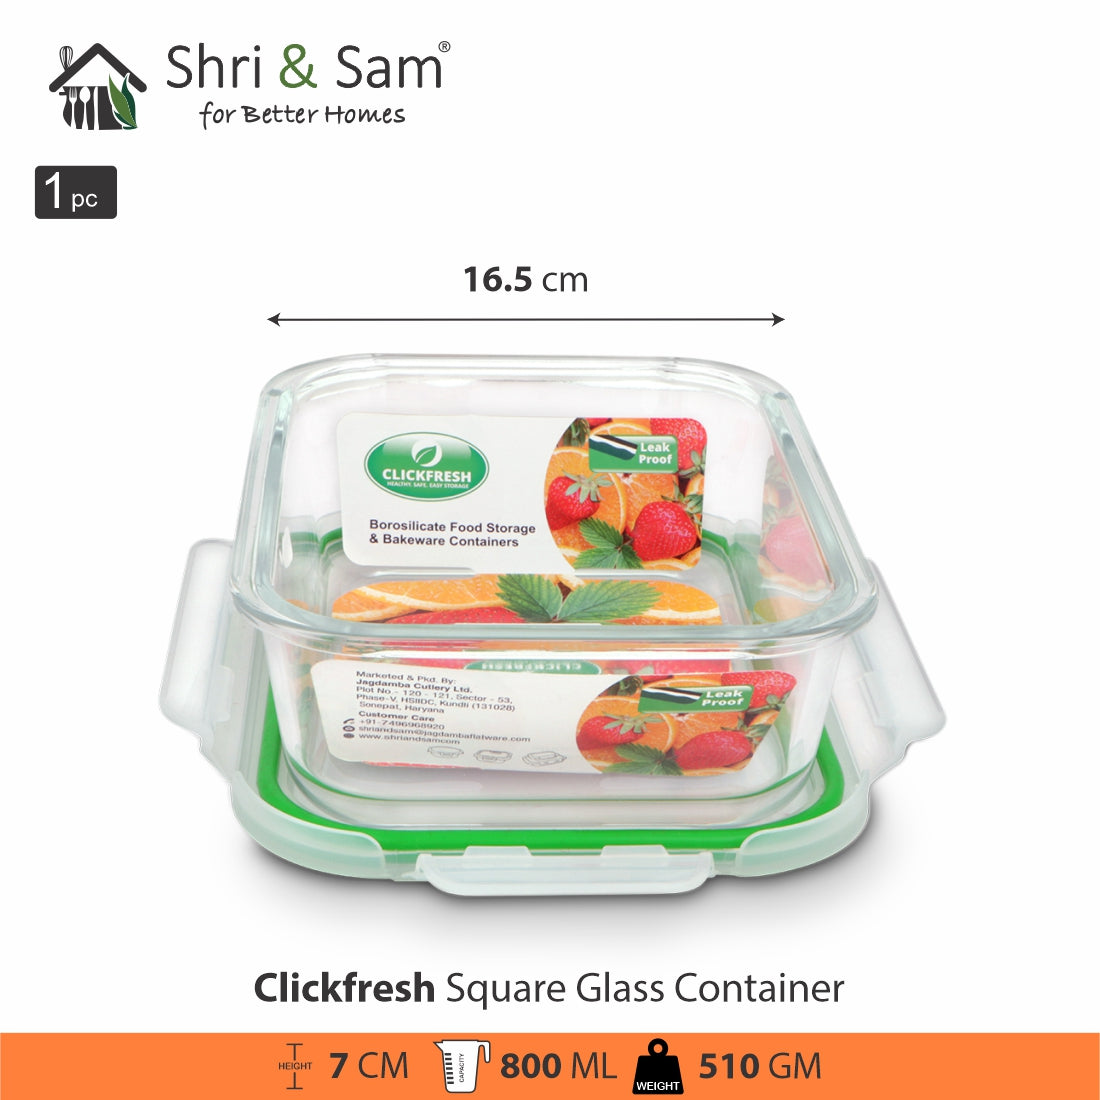 Glass 800ml Food Storage & Bakeware Container with Airtight Lid Square Clickfresh